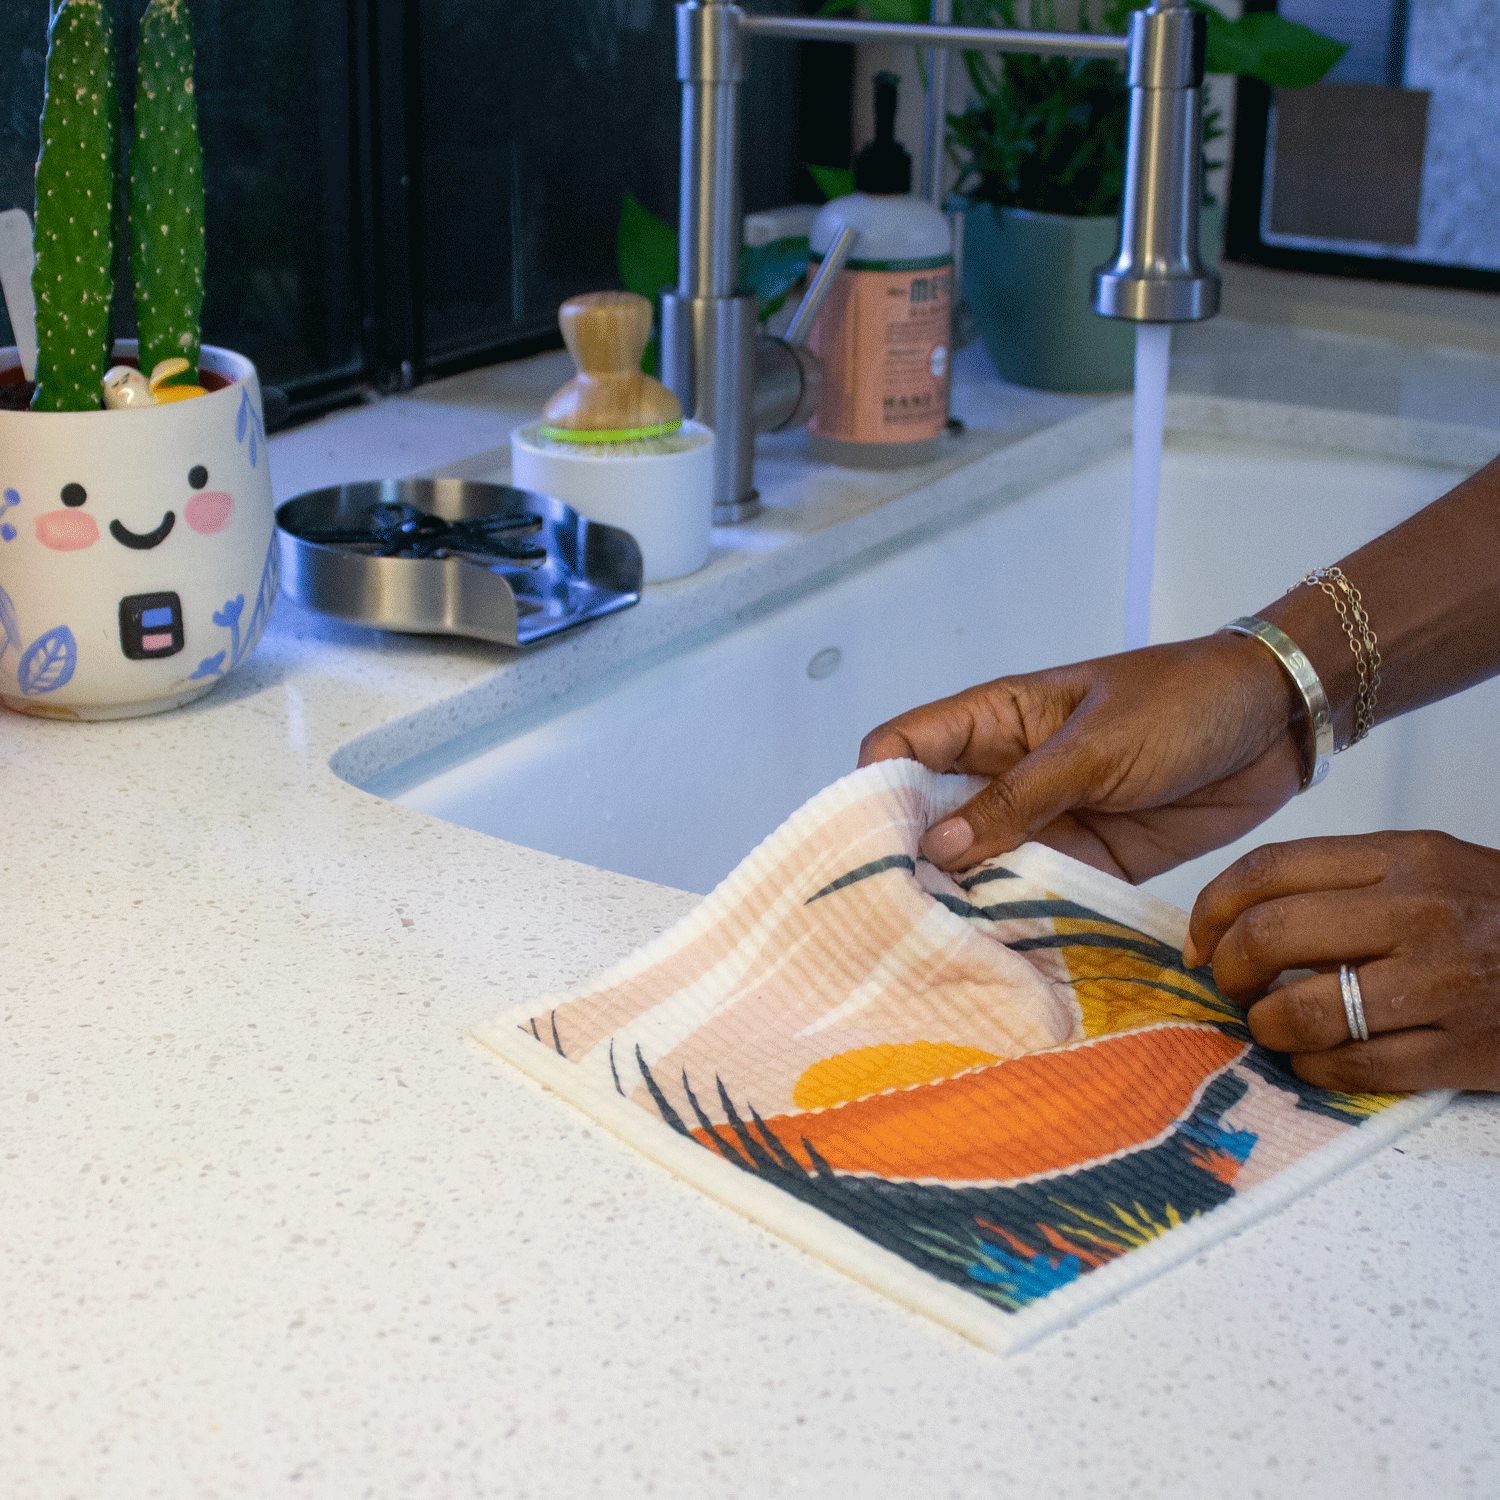 Two hands hold a super sponge cloth with a desert scene near the edge of a kitchen sink. The sponge cloth is wet, and bends in a soft curve.